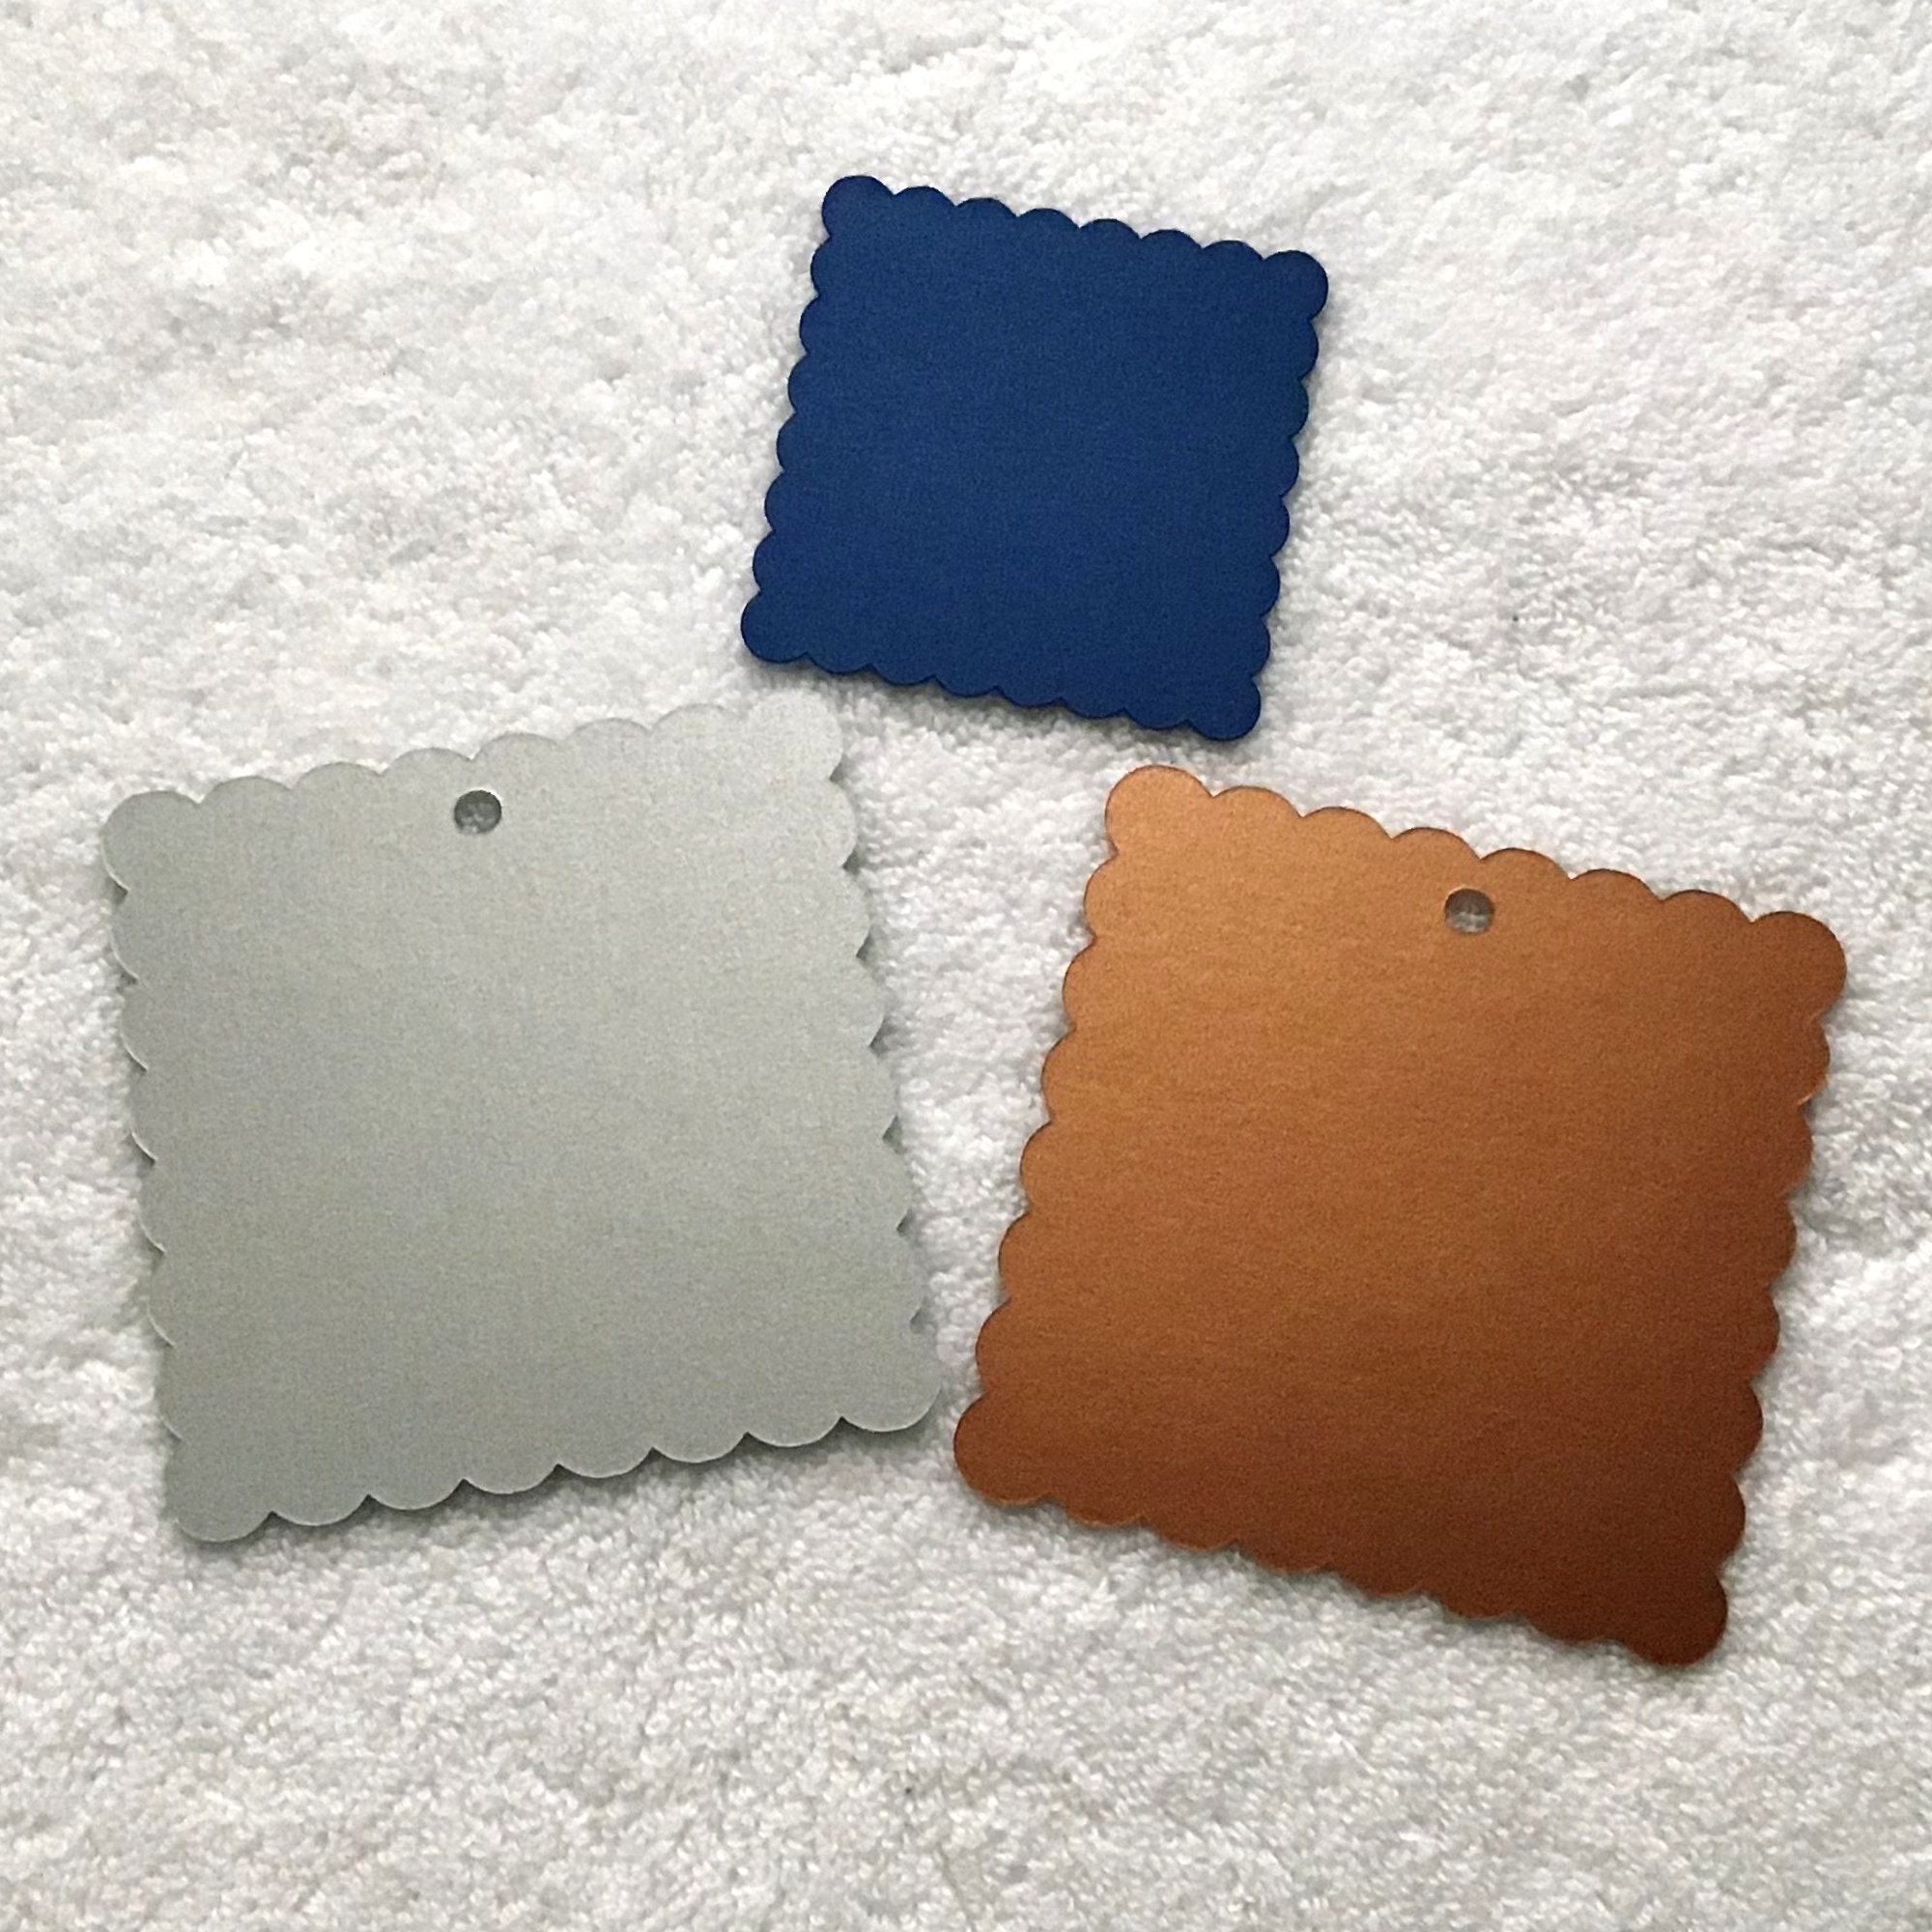 Scalloped Square Die Cuts Pearlescent Cardstock Paper Squares Choose Size,  Color Set of 40 Blank Square Tag Scalloped Blank DIY Place Cards 